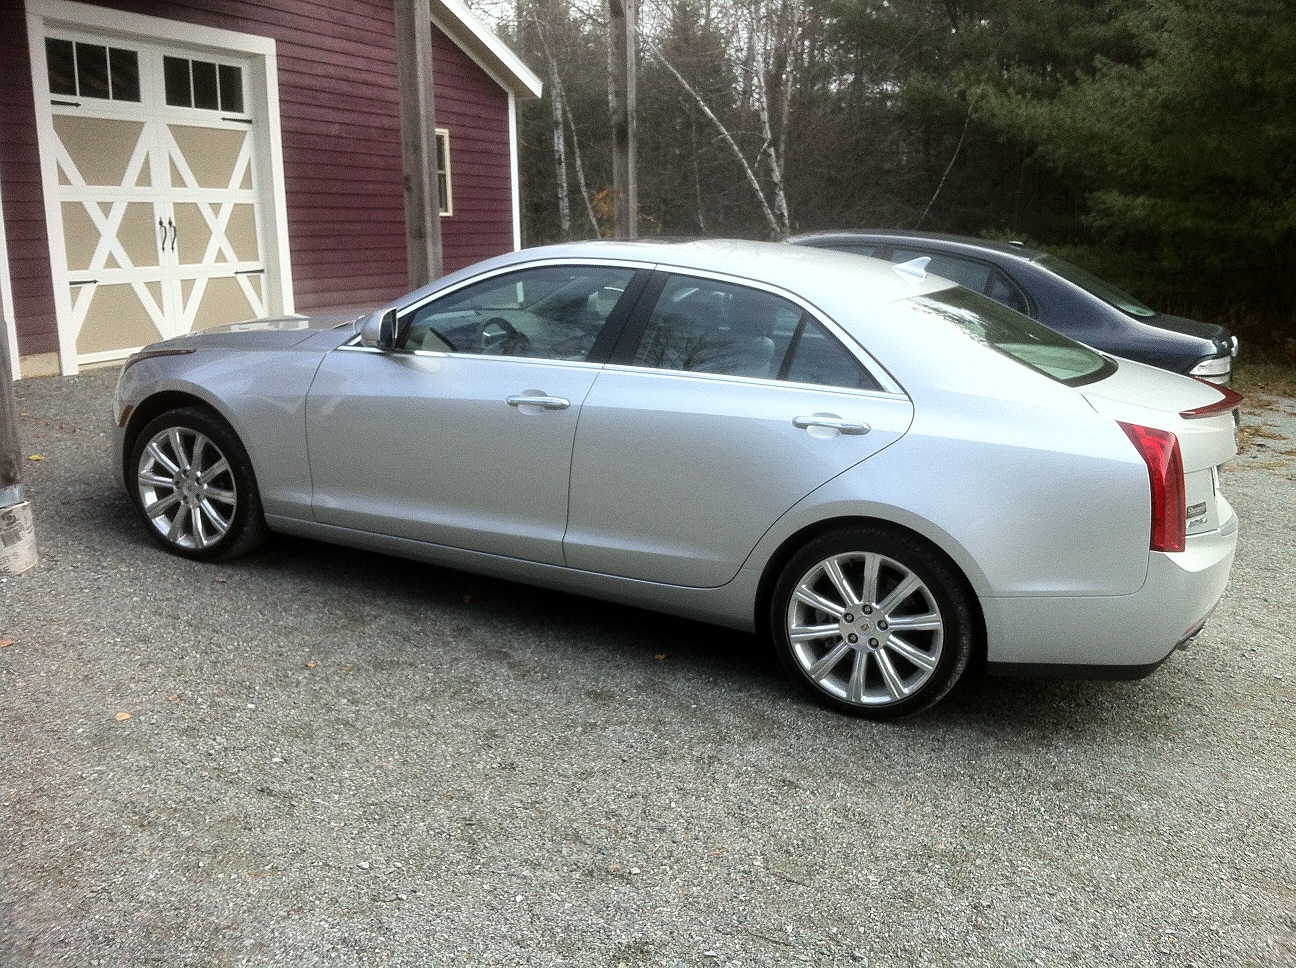 2013 Cadillac Ats 2 0t Awd Automatic 1 4 Mile Trap Speeds 0